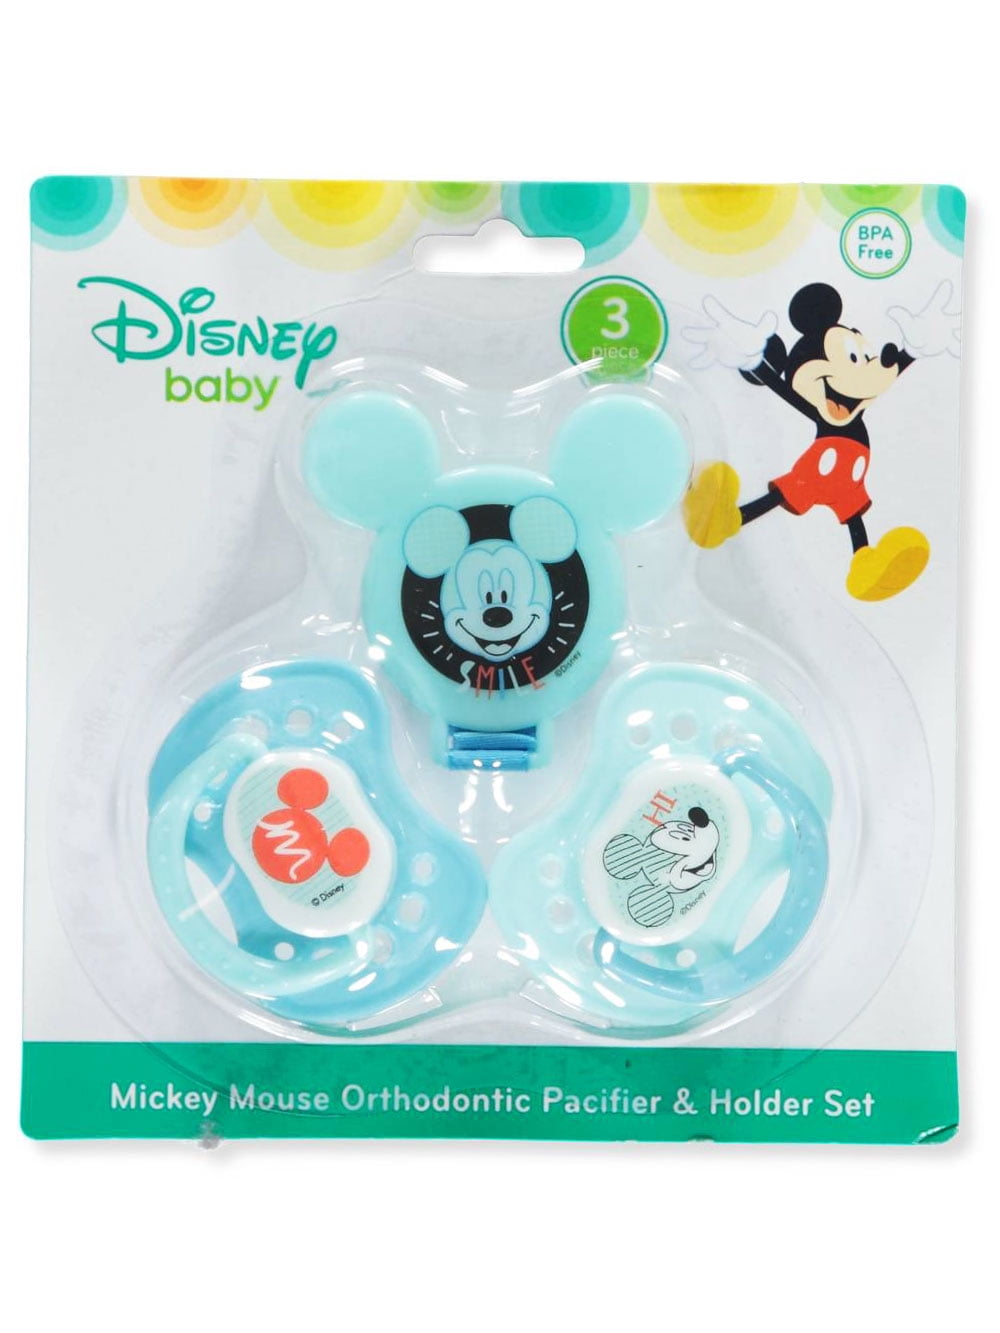 DISNEY BABY MICKEY MOUSE 3 PACK SET 2 ORTHODONTIC PACIFIER BPA FREE & HOLDER SET 